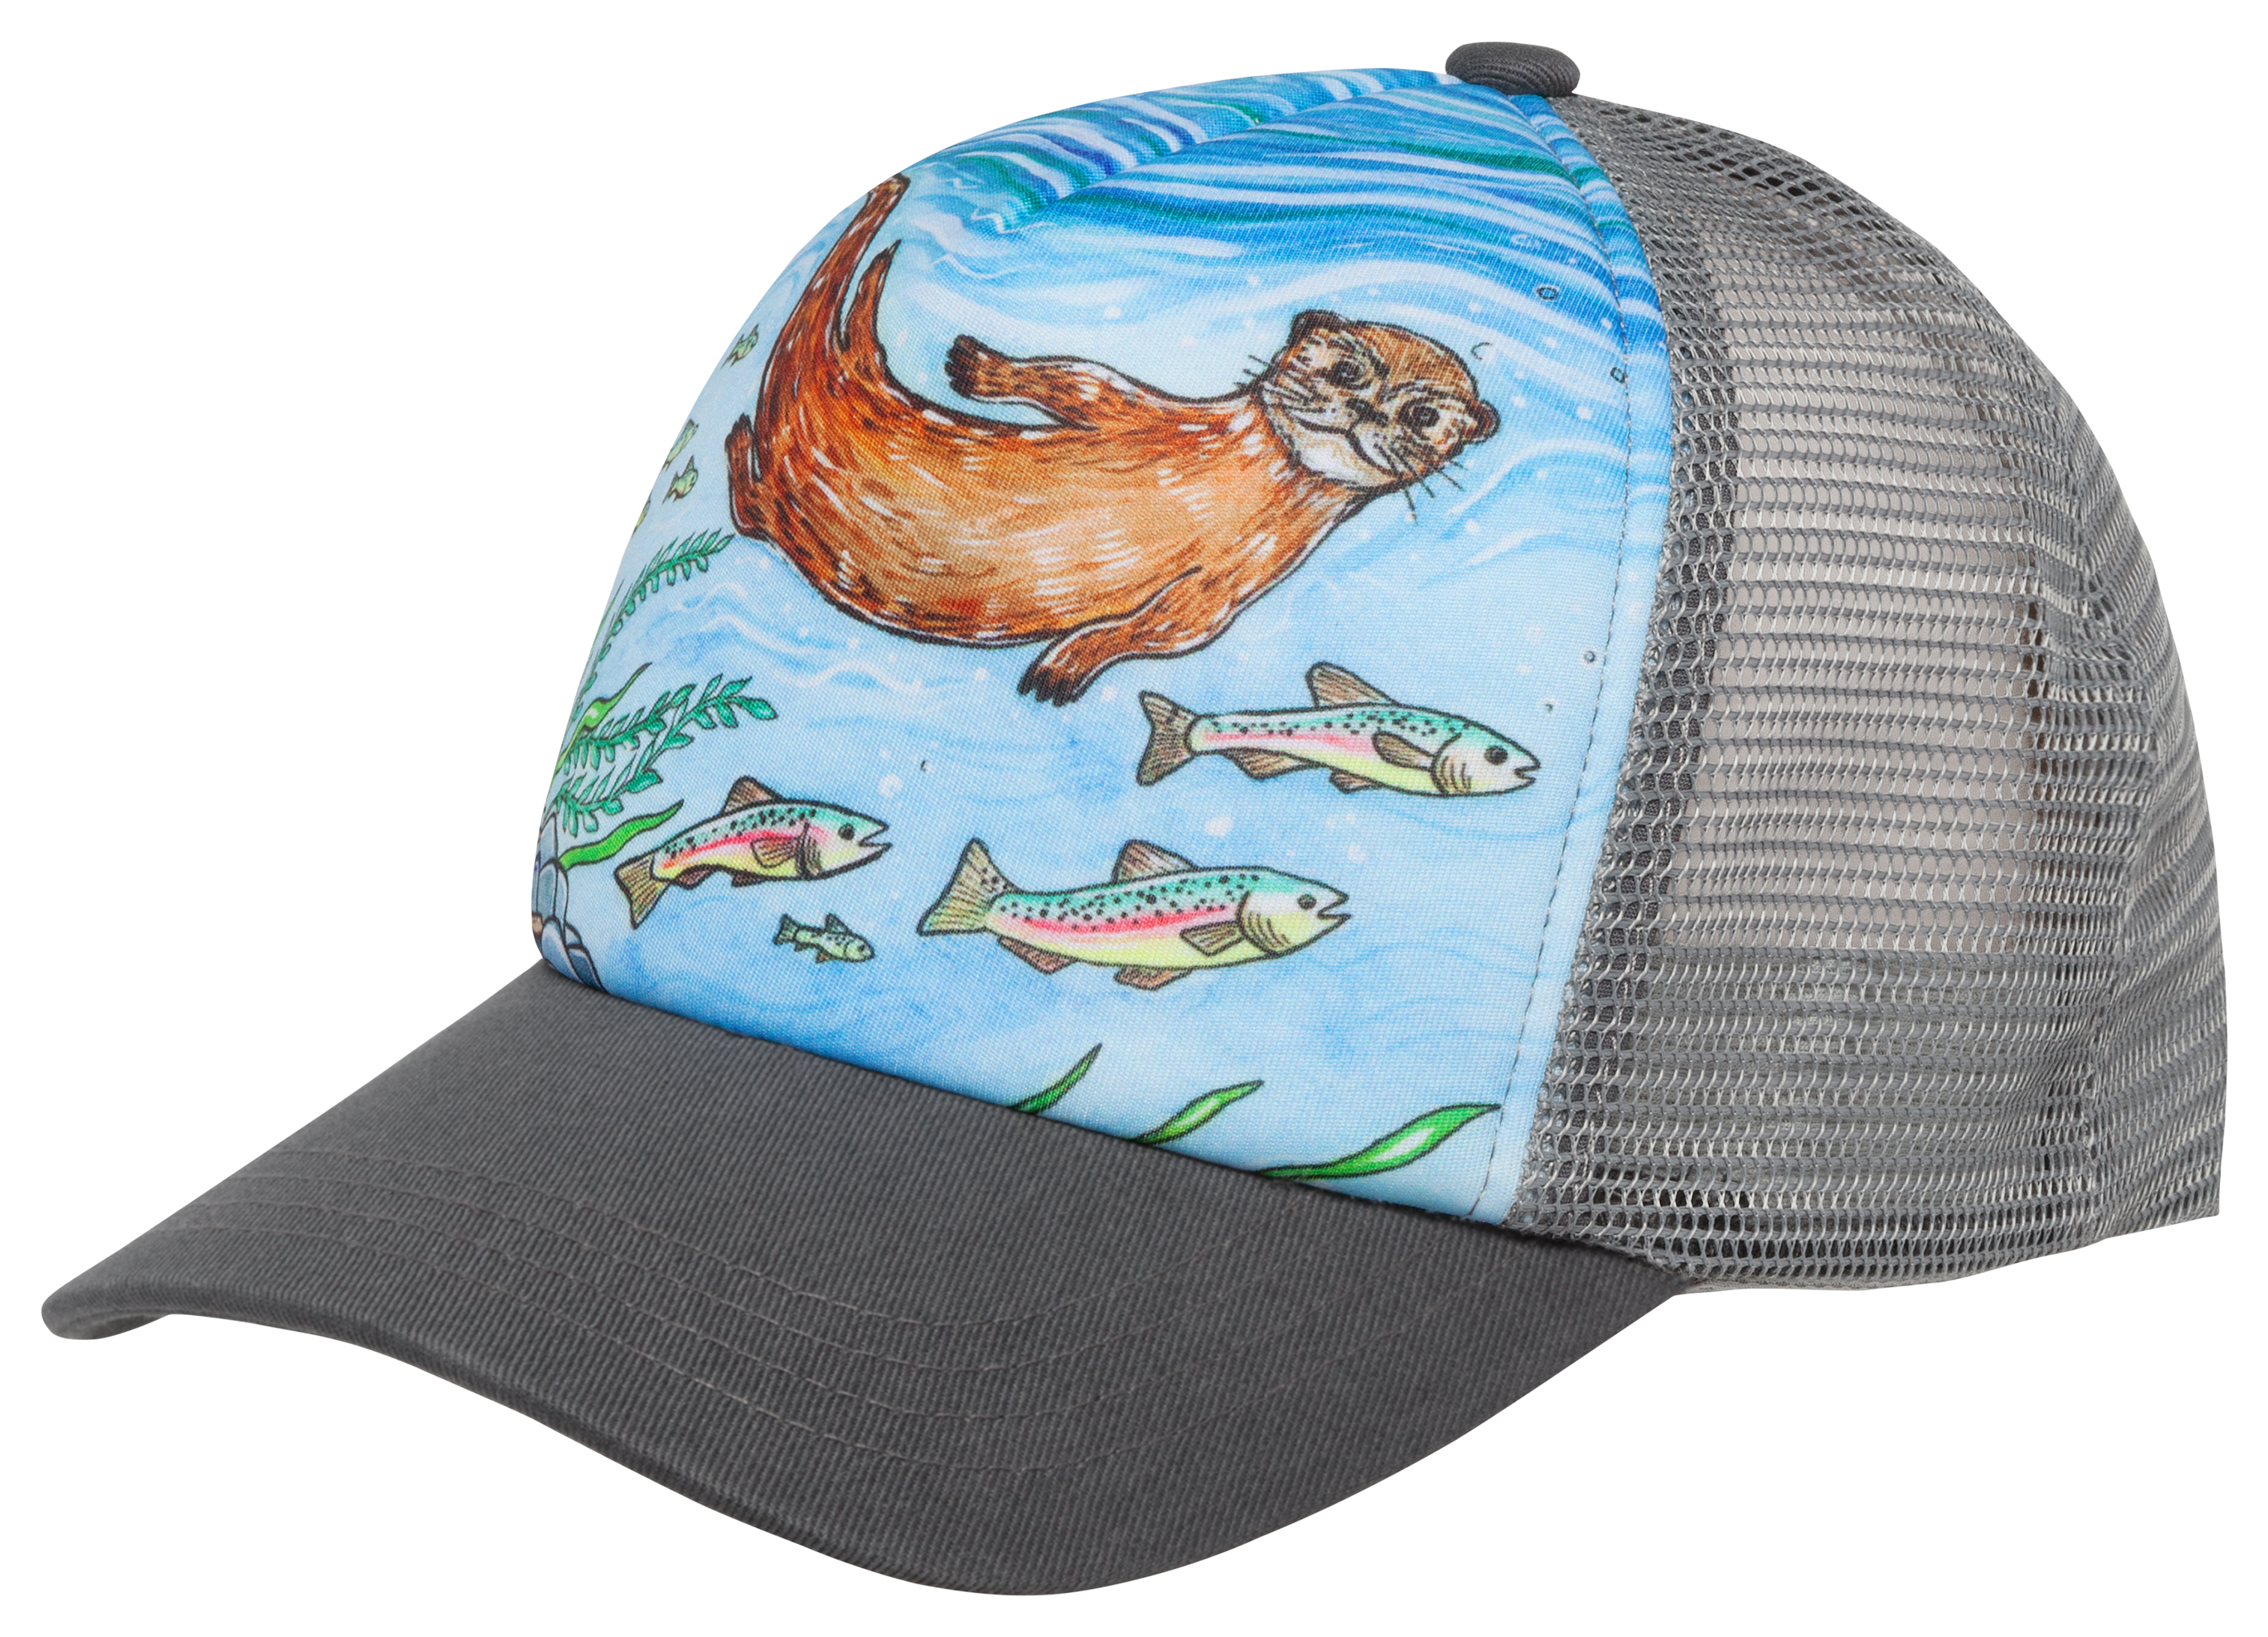 Sunday Afternoons Artist Series River Otter Trucker Cap for Kids